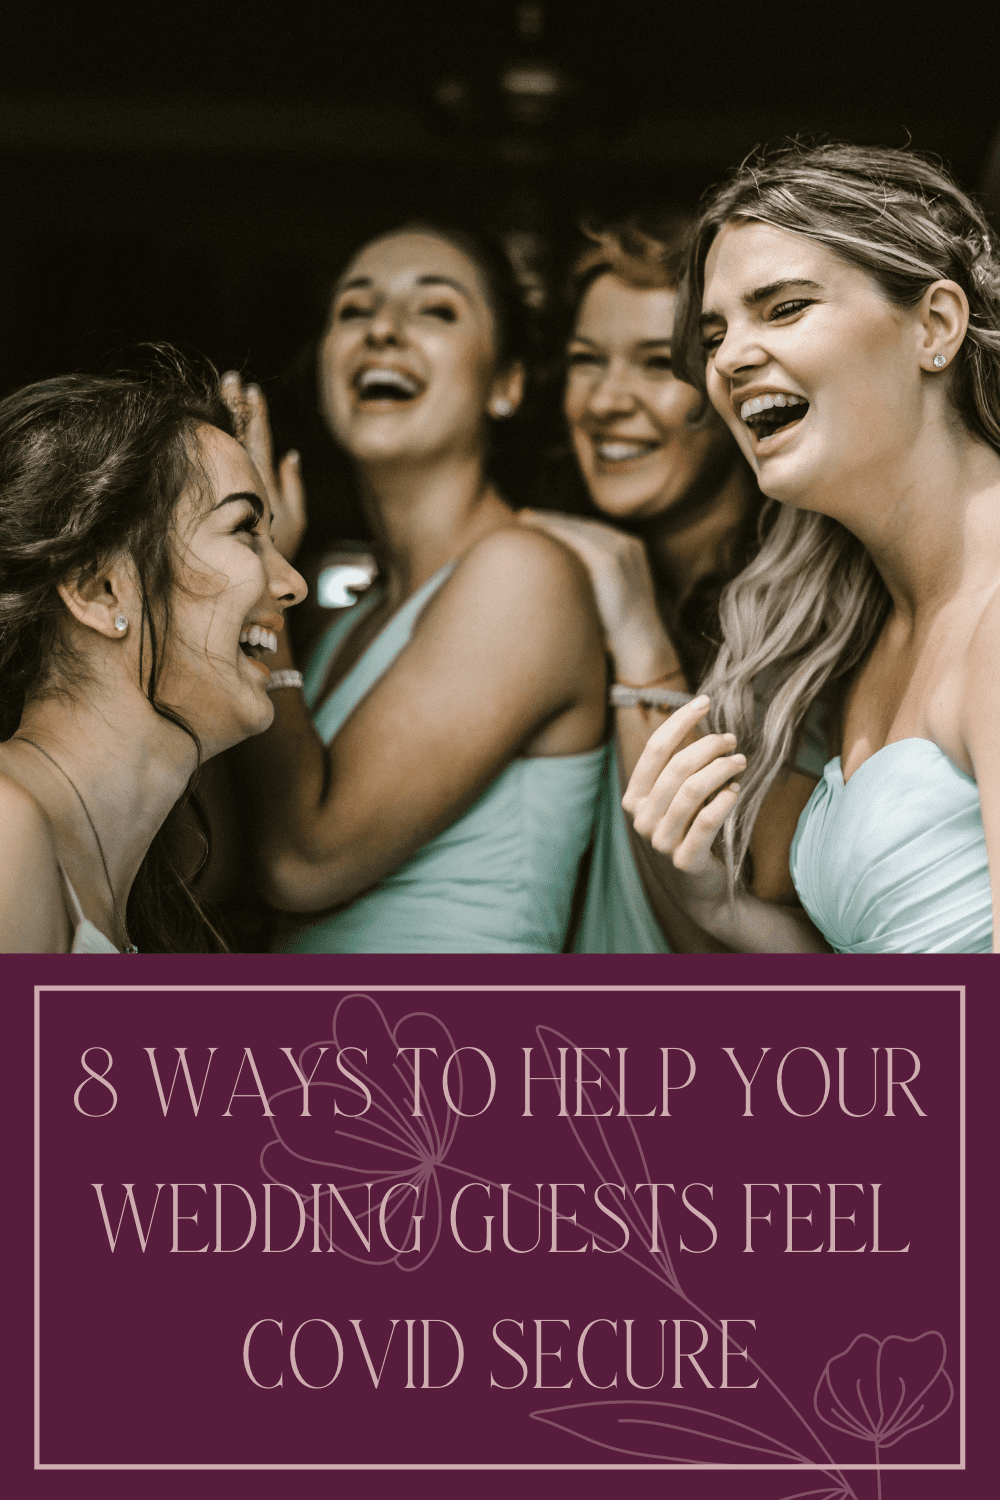 8 Ways to Help Your Wedding Guests Feel Covid Secure